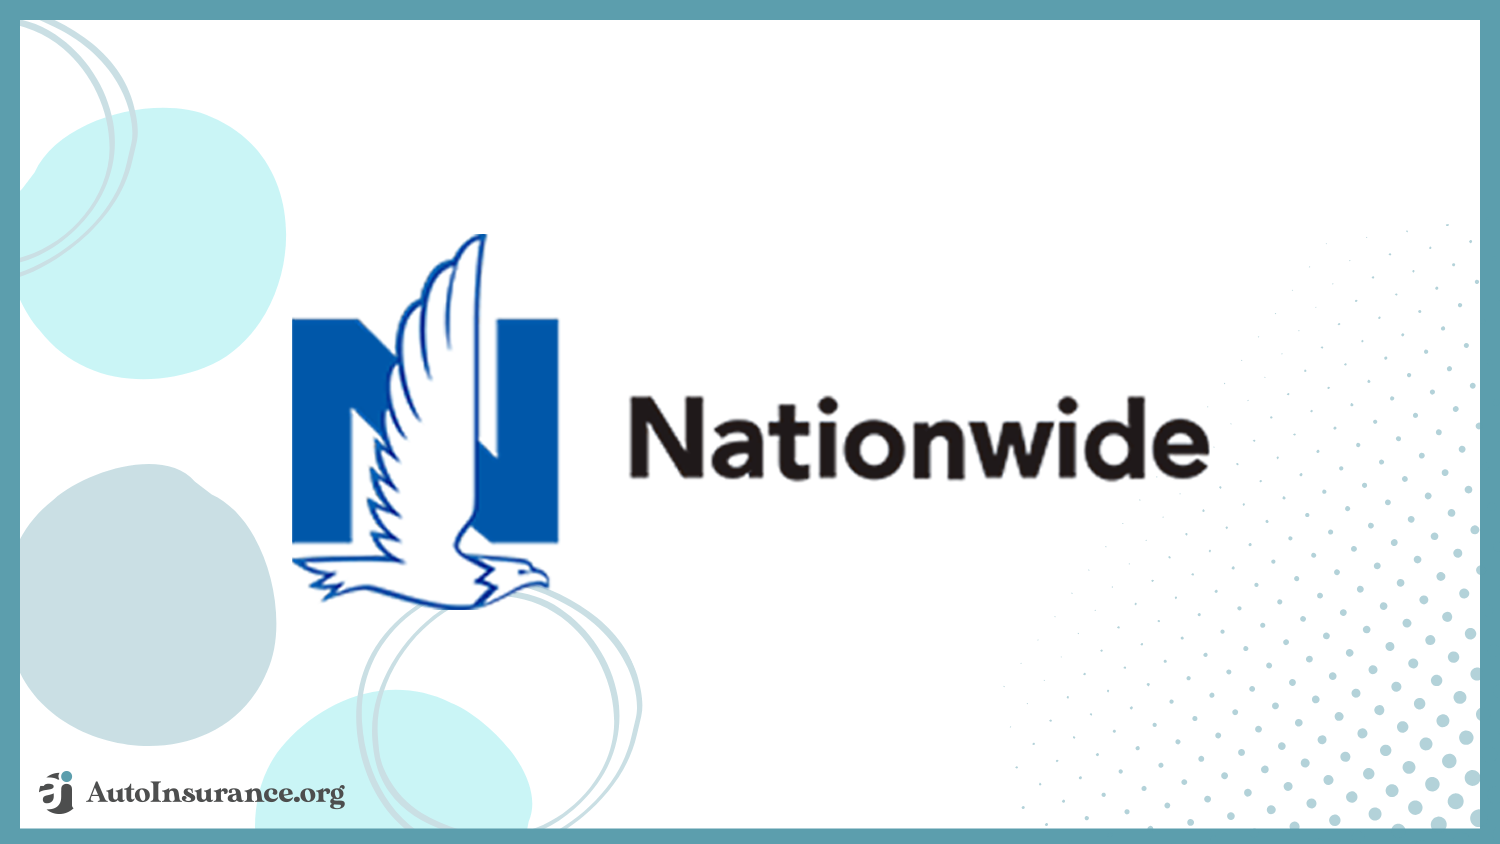 Nationwide: Best Auto Insurance for Families